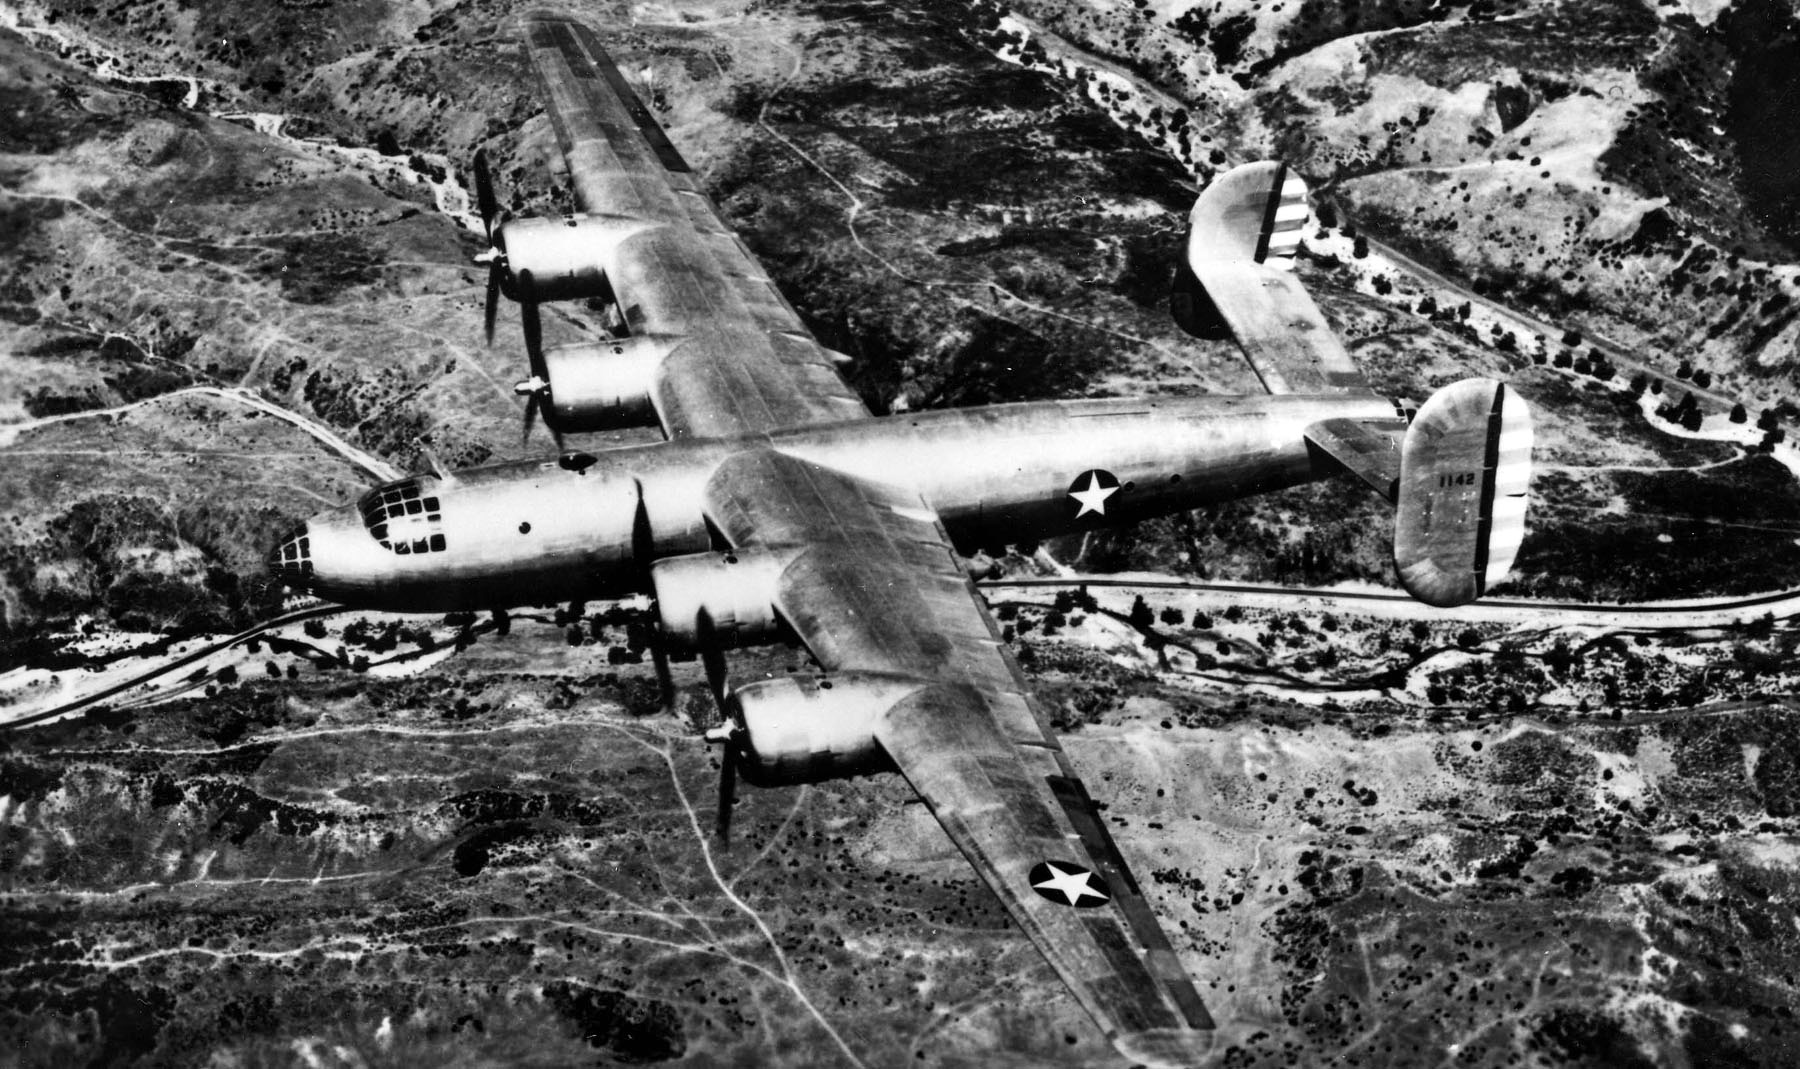 Consolidated Aircraft Company developed the XB-32 as a rival to Boeing’s B-29 program, but the XB-32 was too flawed to go into production. 